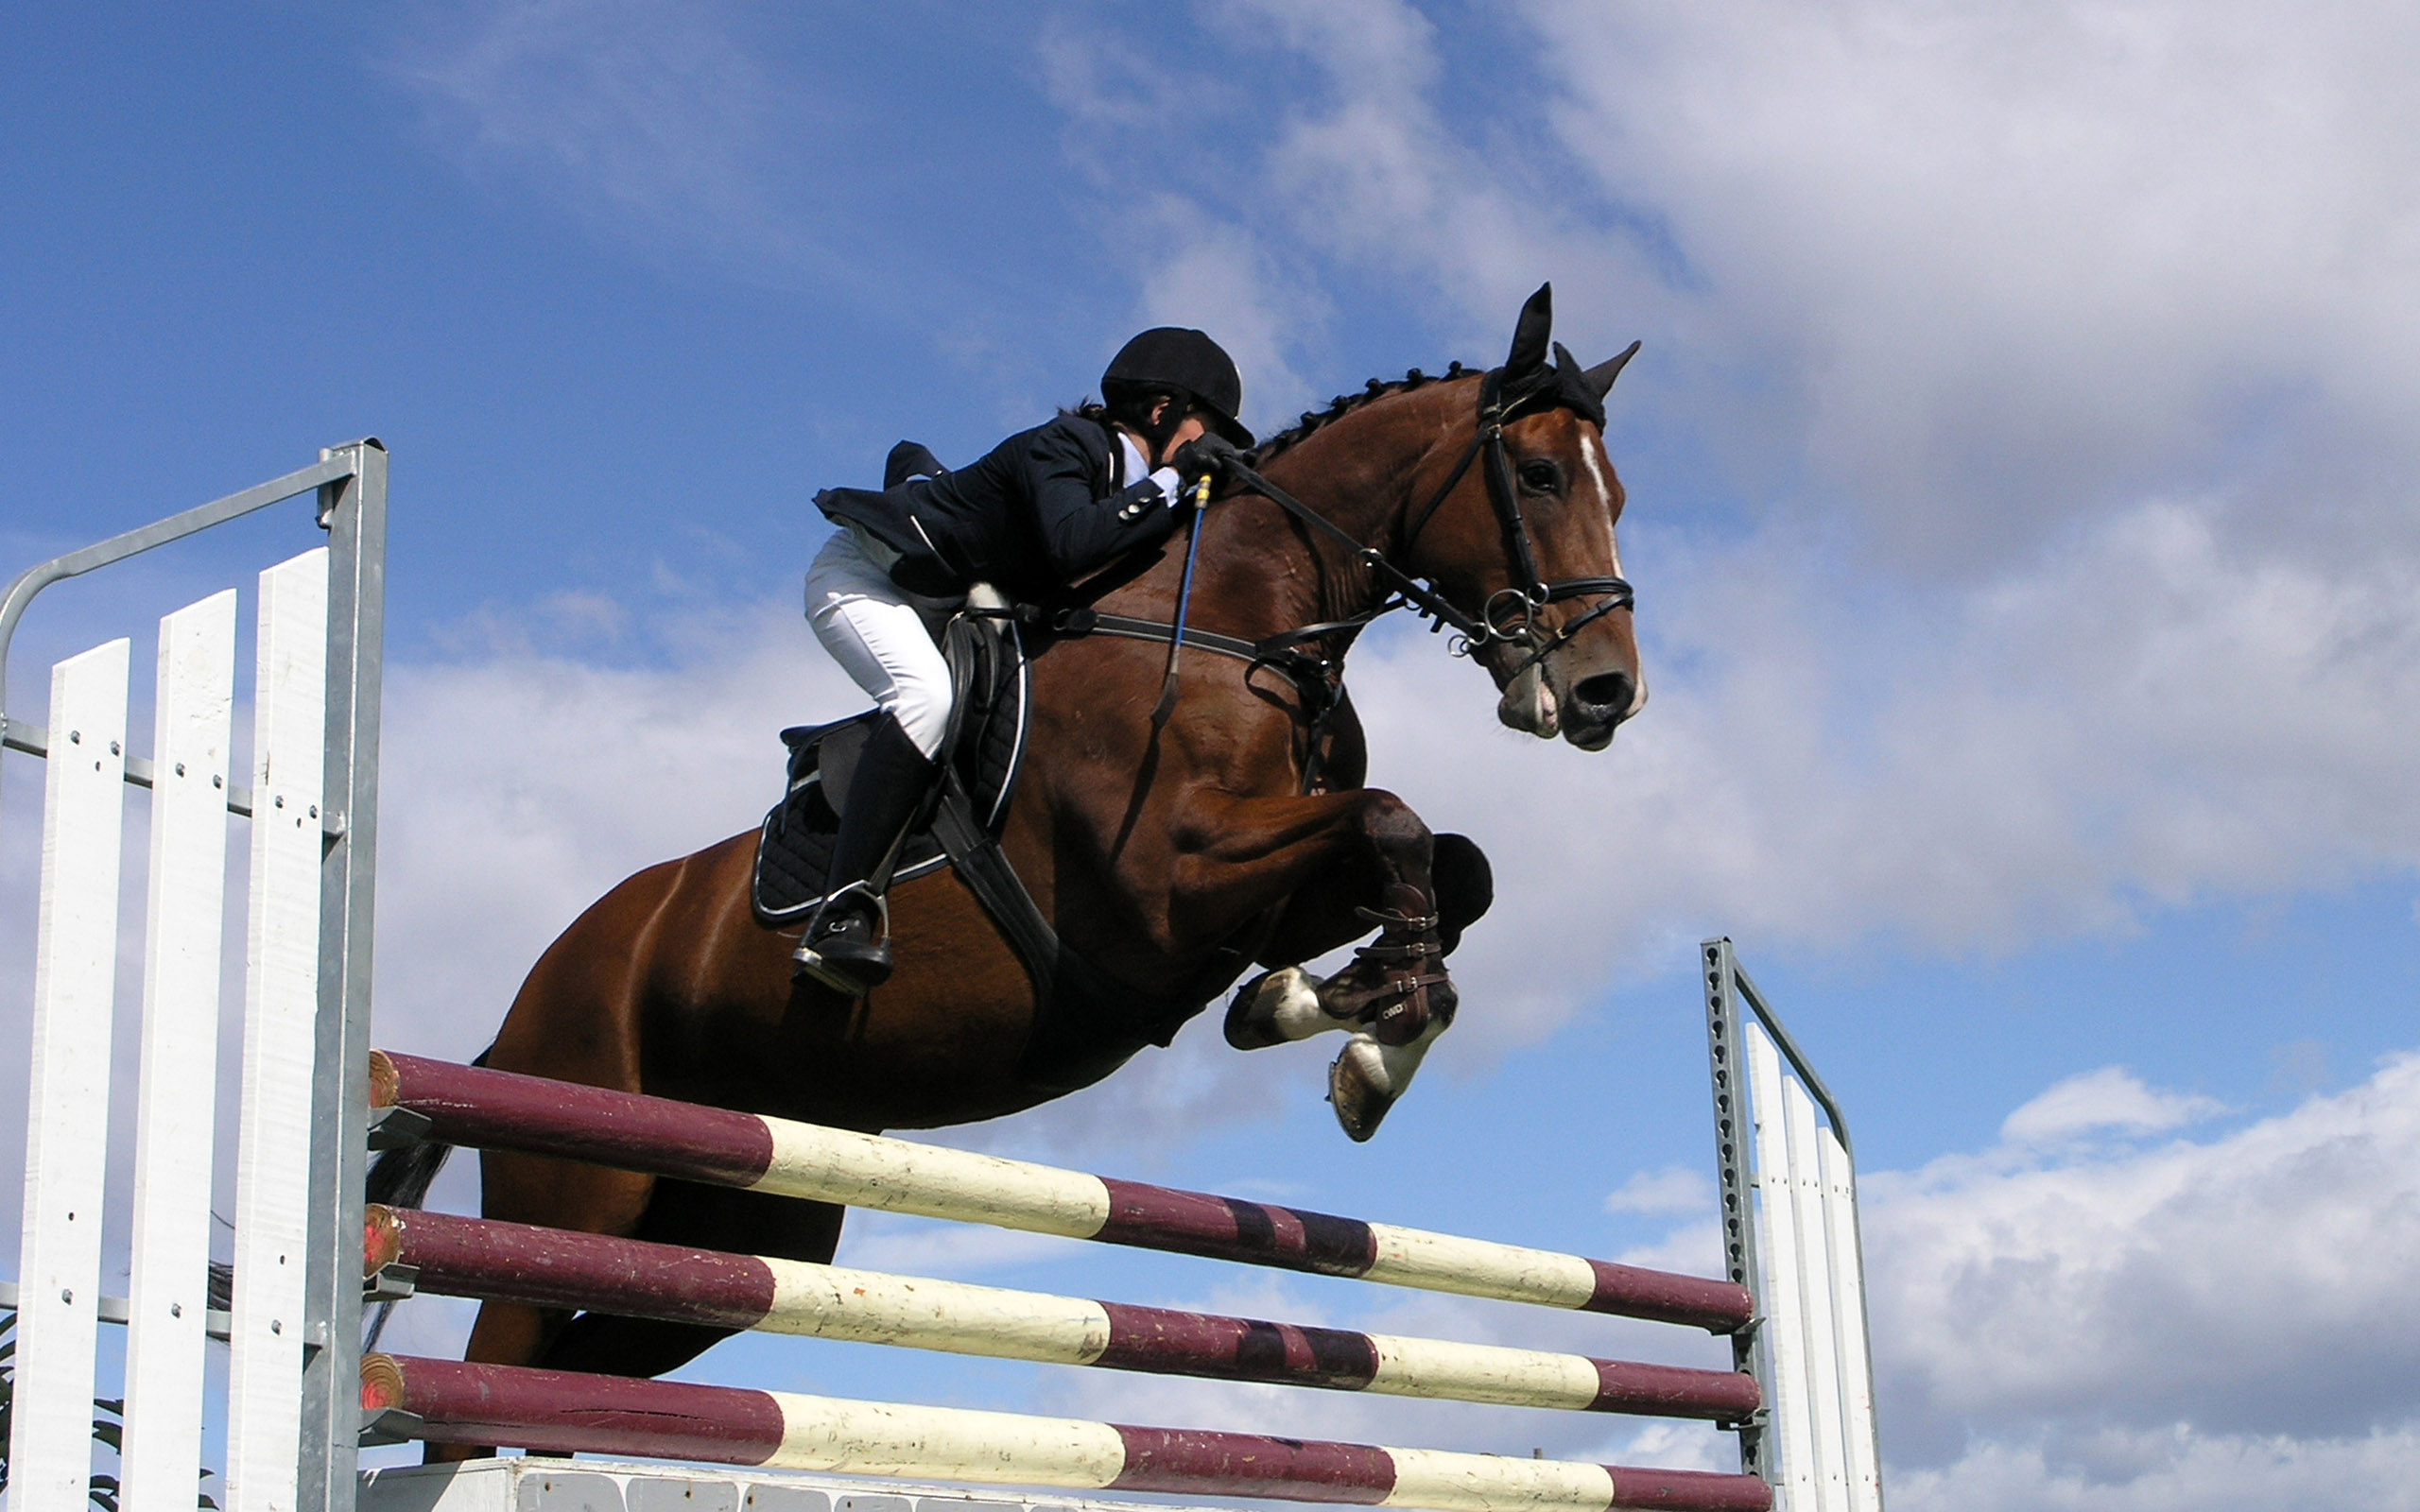 Jumping: Horse Show, Horse jumping obstacles, Horsewoman, Outdoor sports, Equestrian sports. 2560x1600 HD Wallpaper.